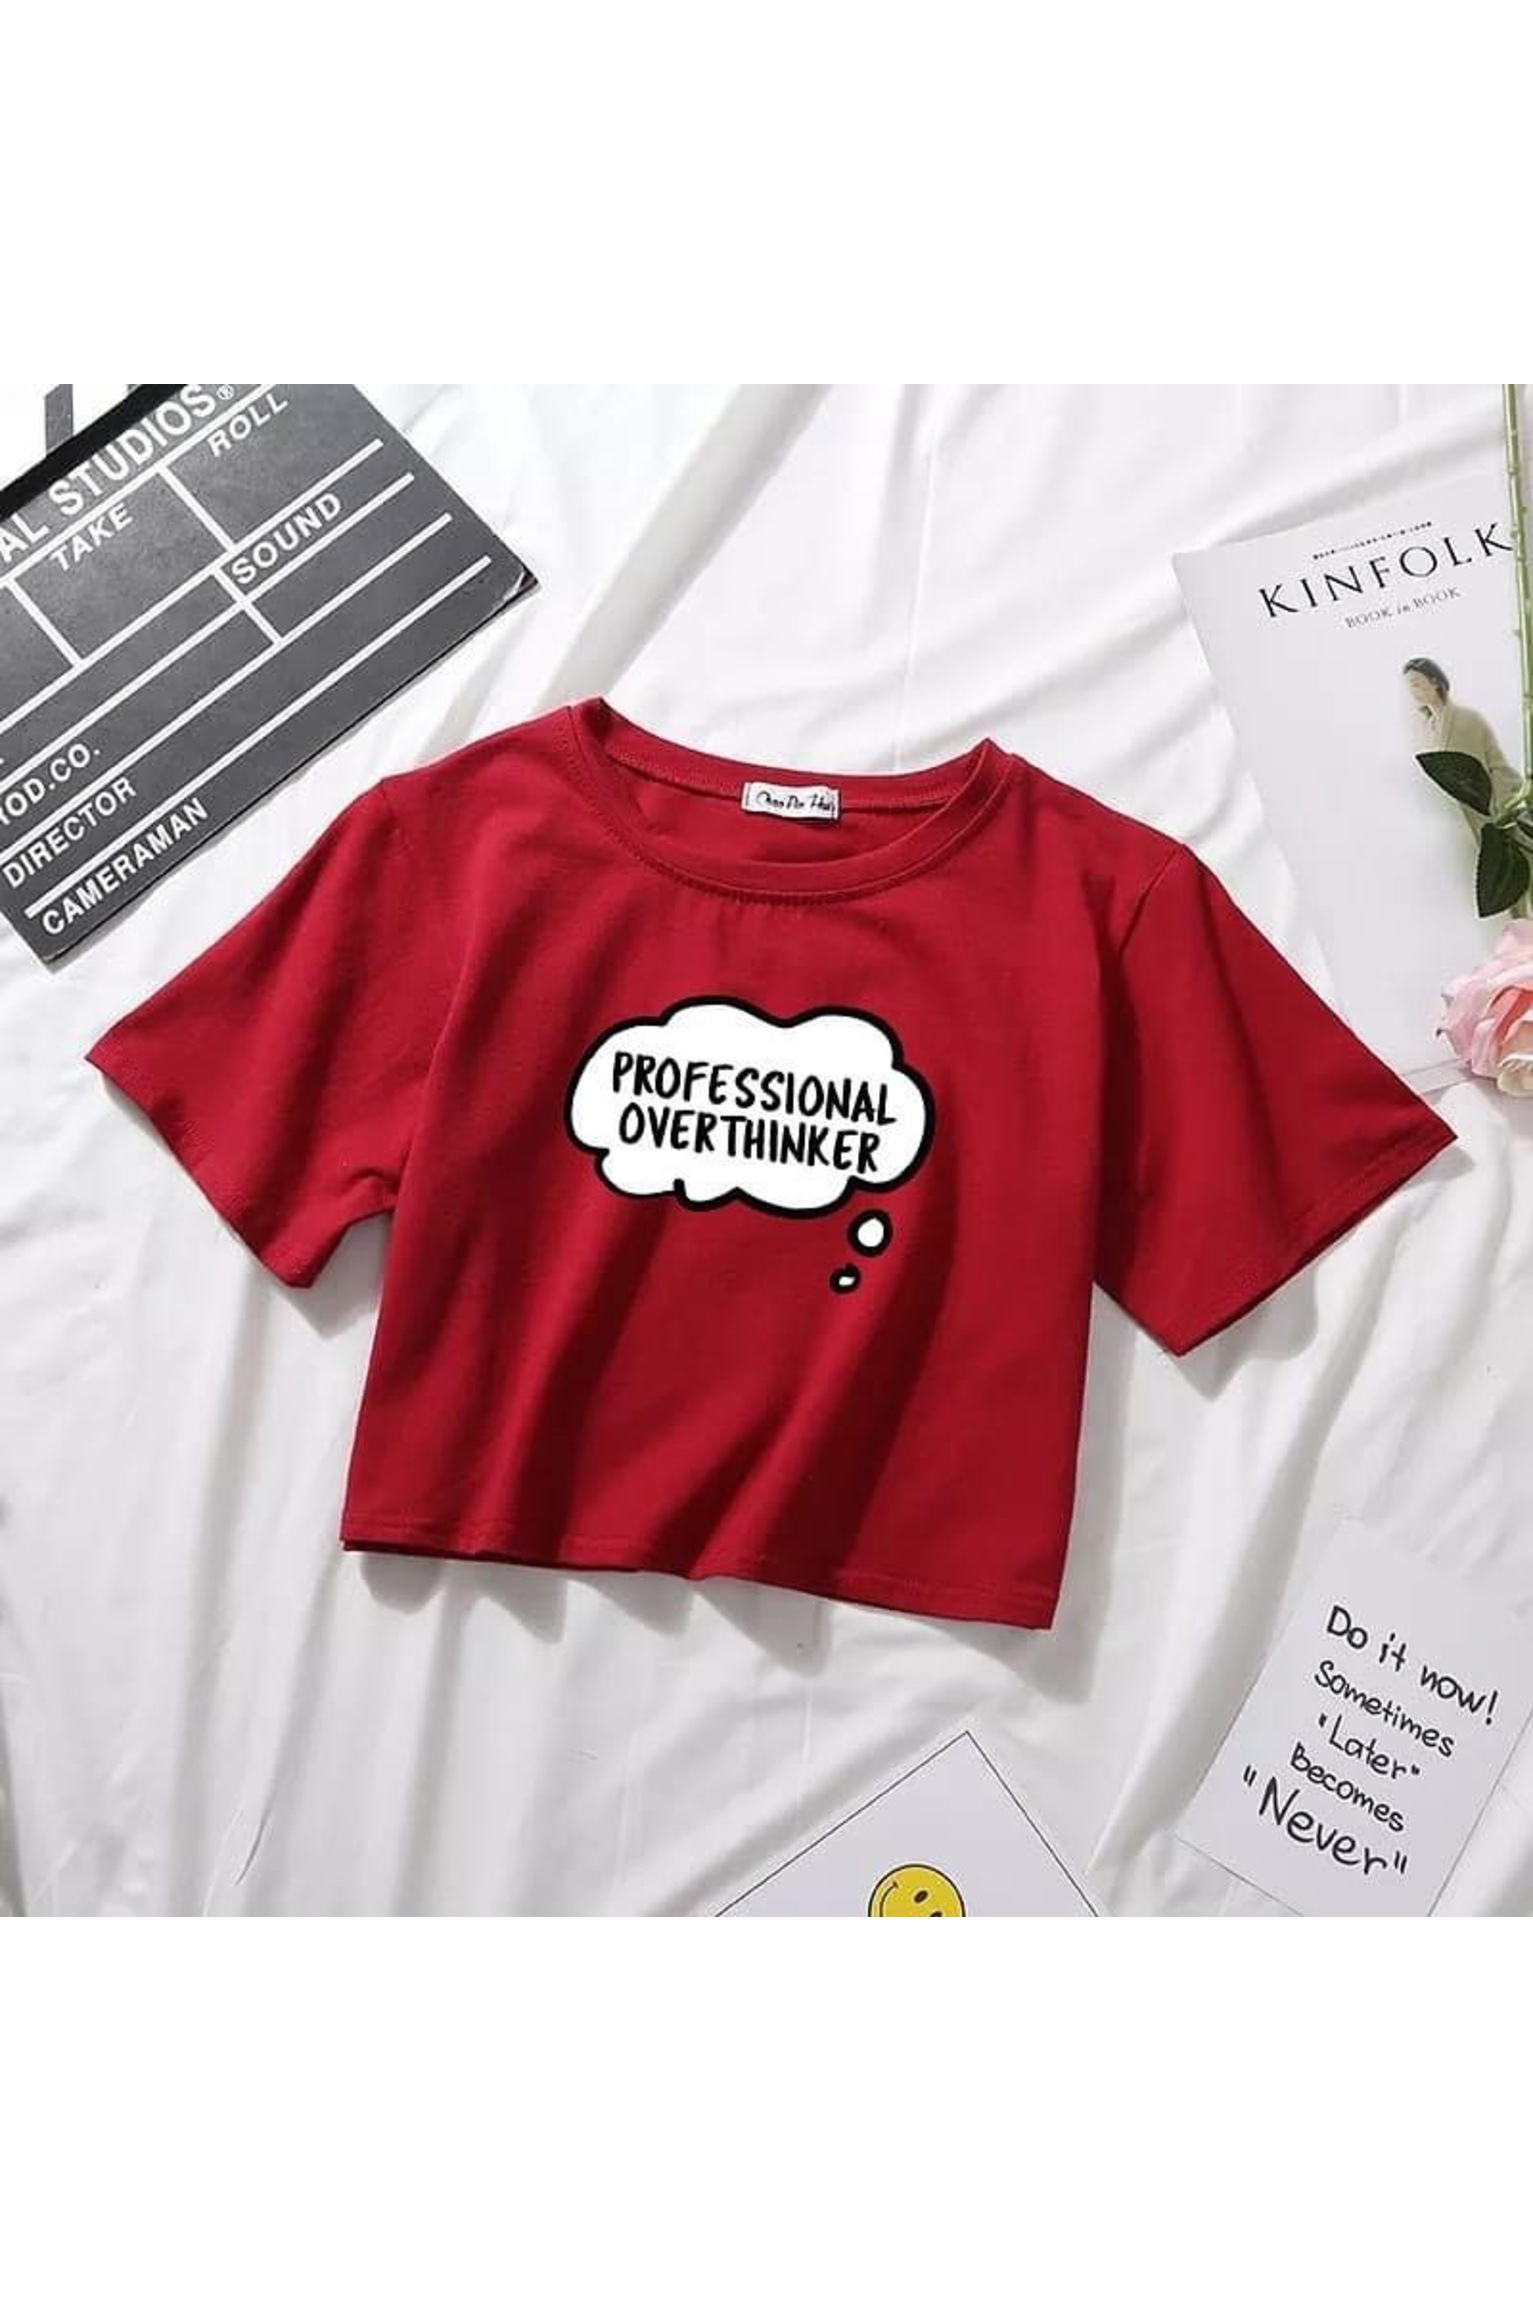 Crop Top Professional Overthinker Printed T-shirt for Women